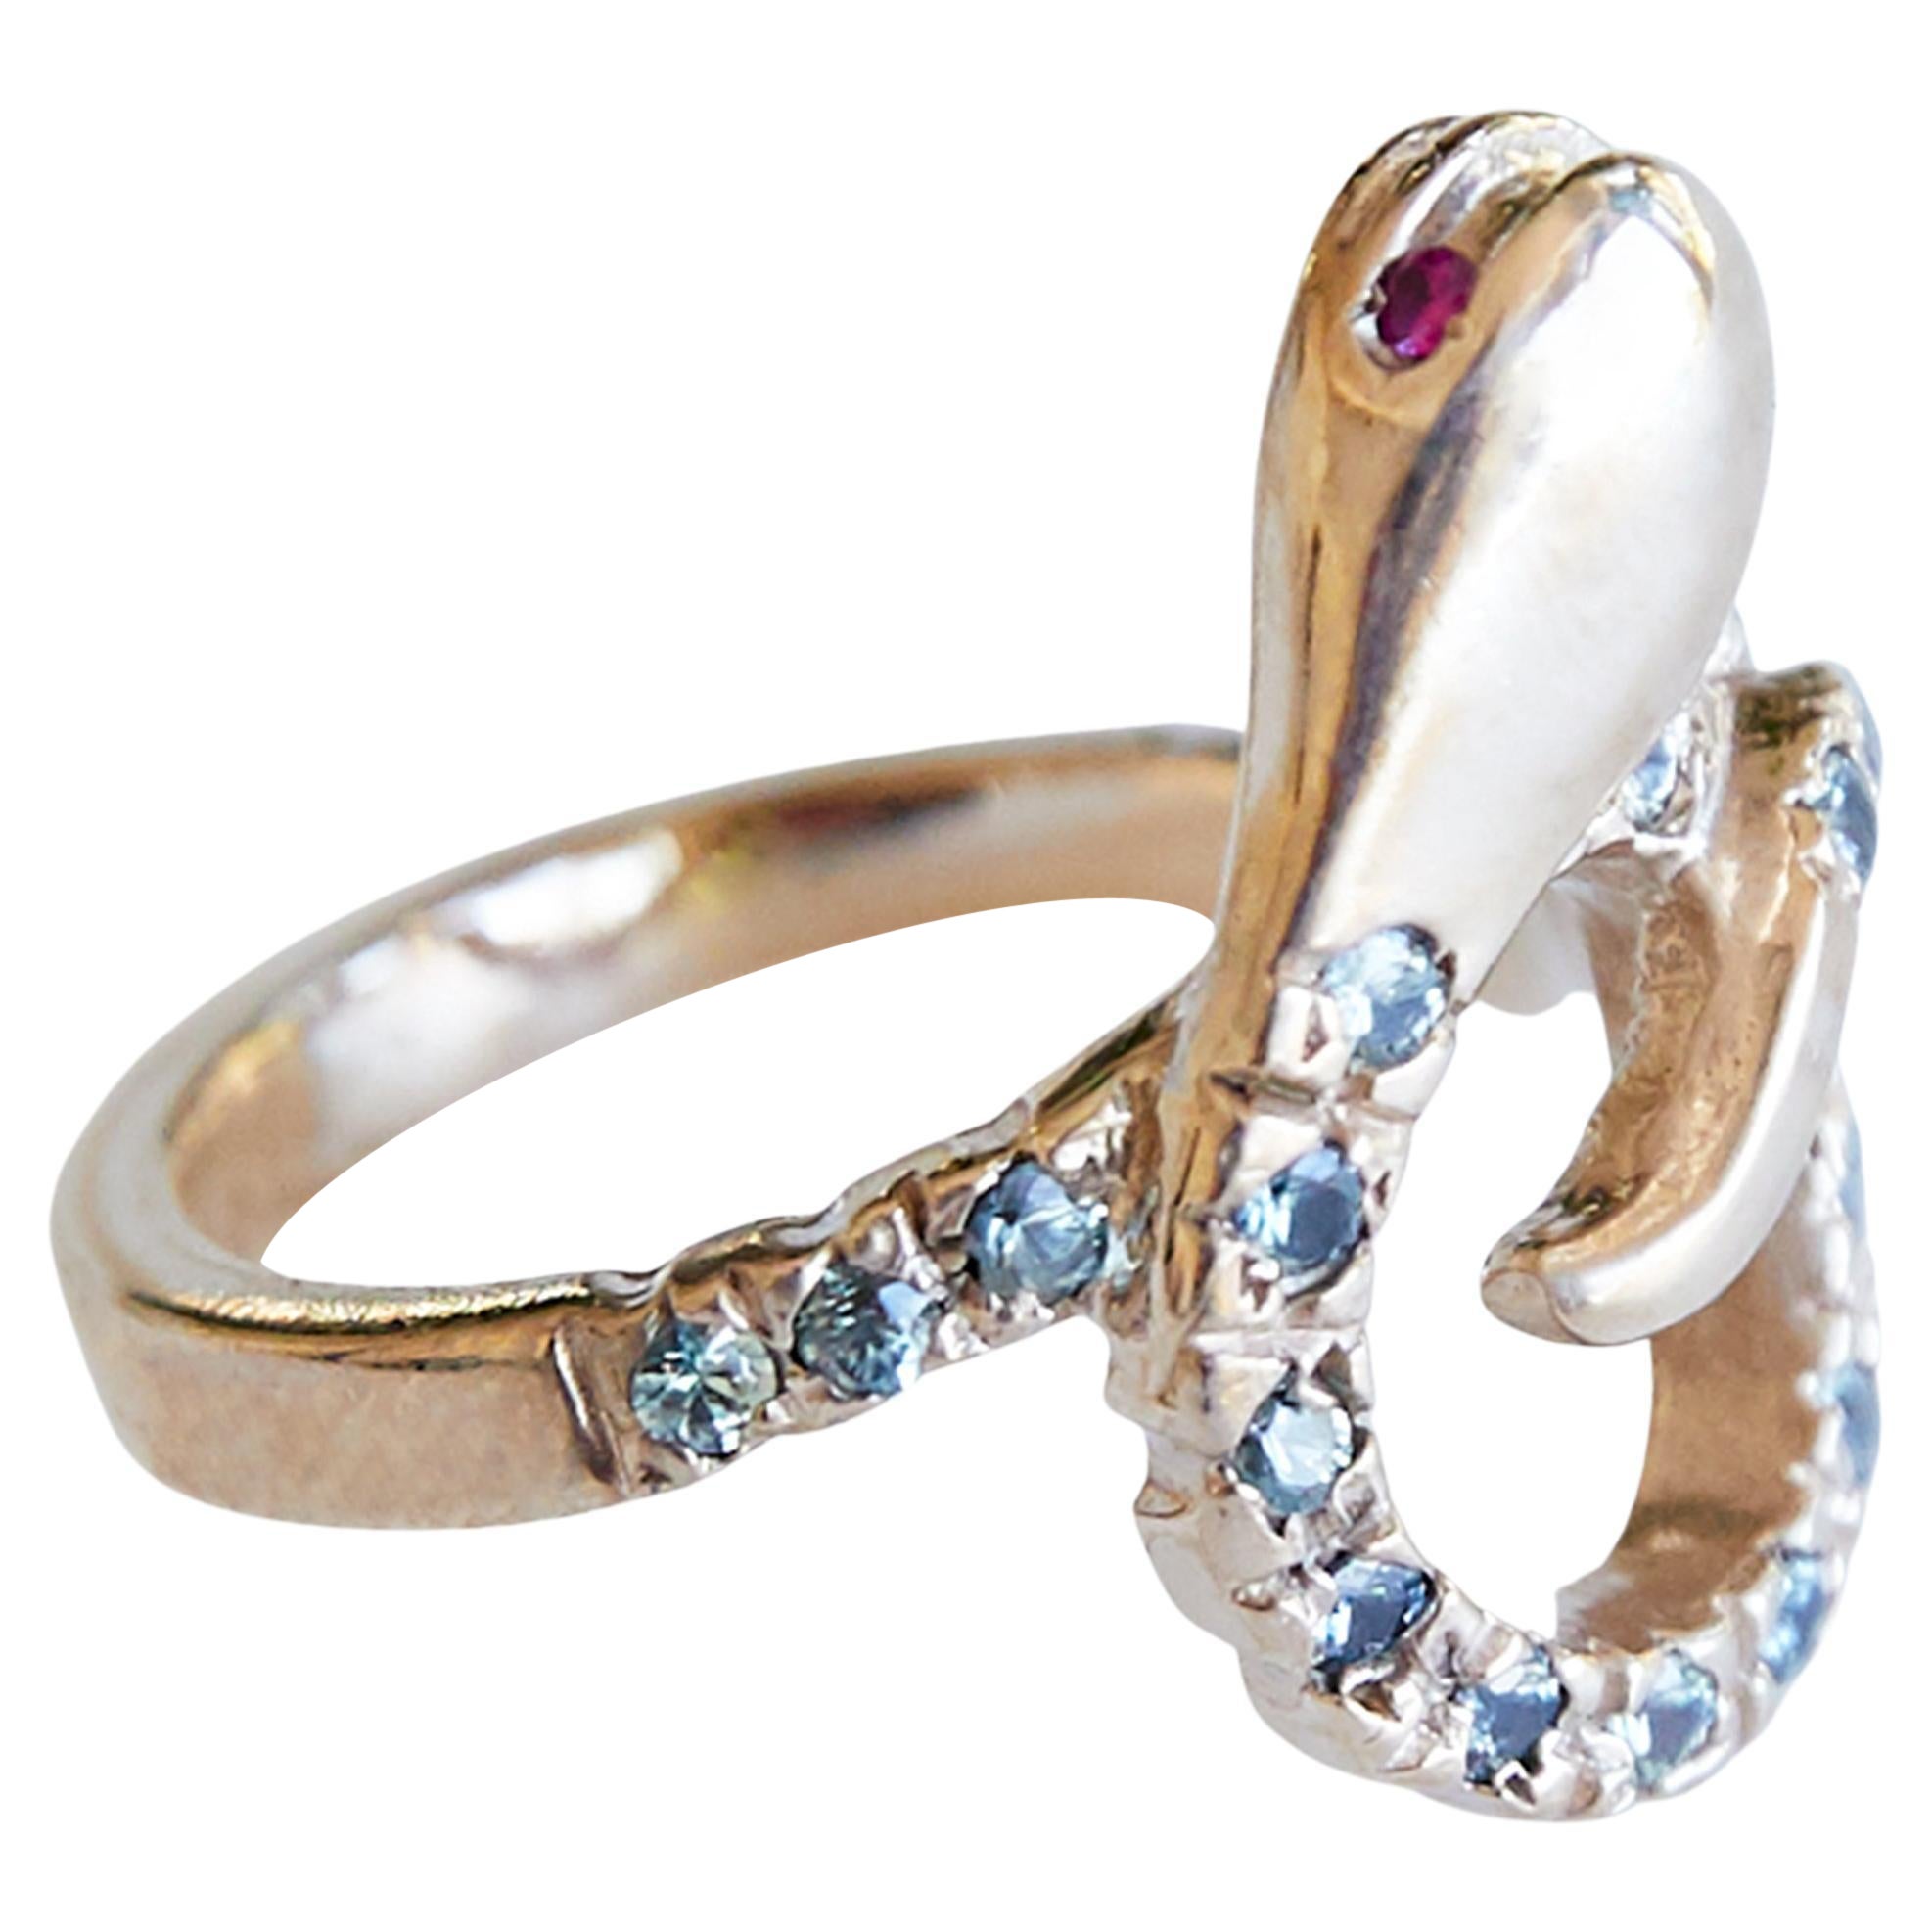 Gold Snake Ring Cocktail Ring Sapphire Ruby Animal jewelry